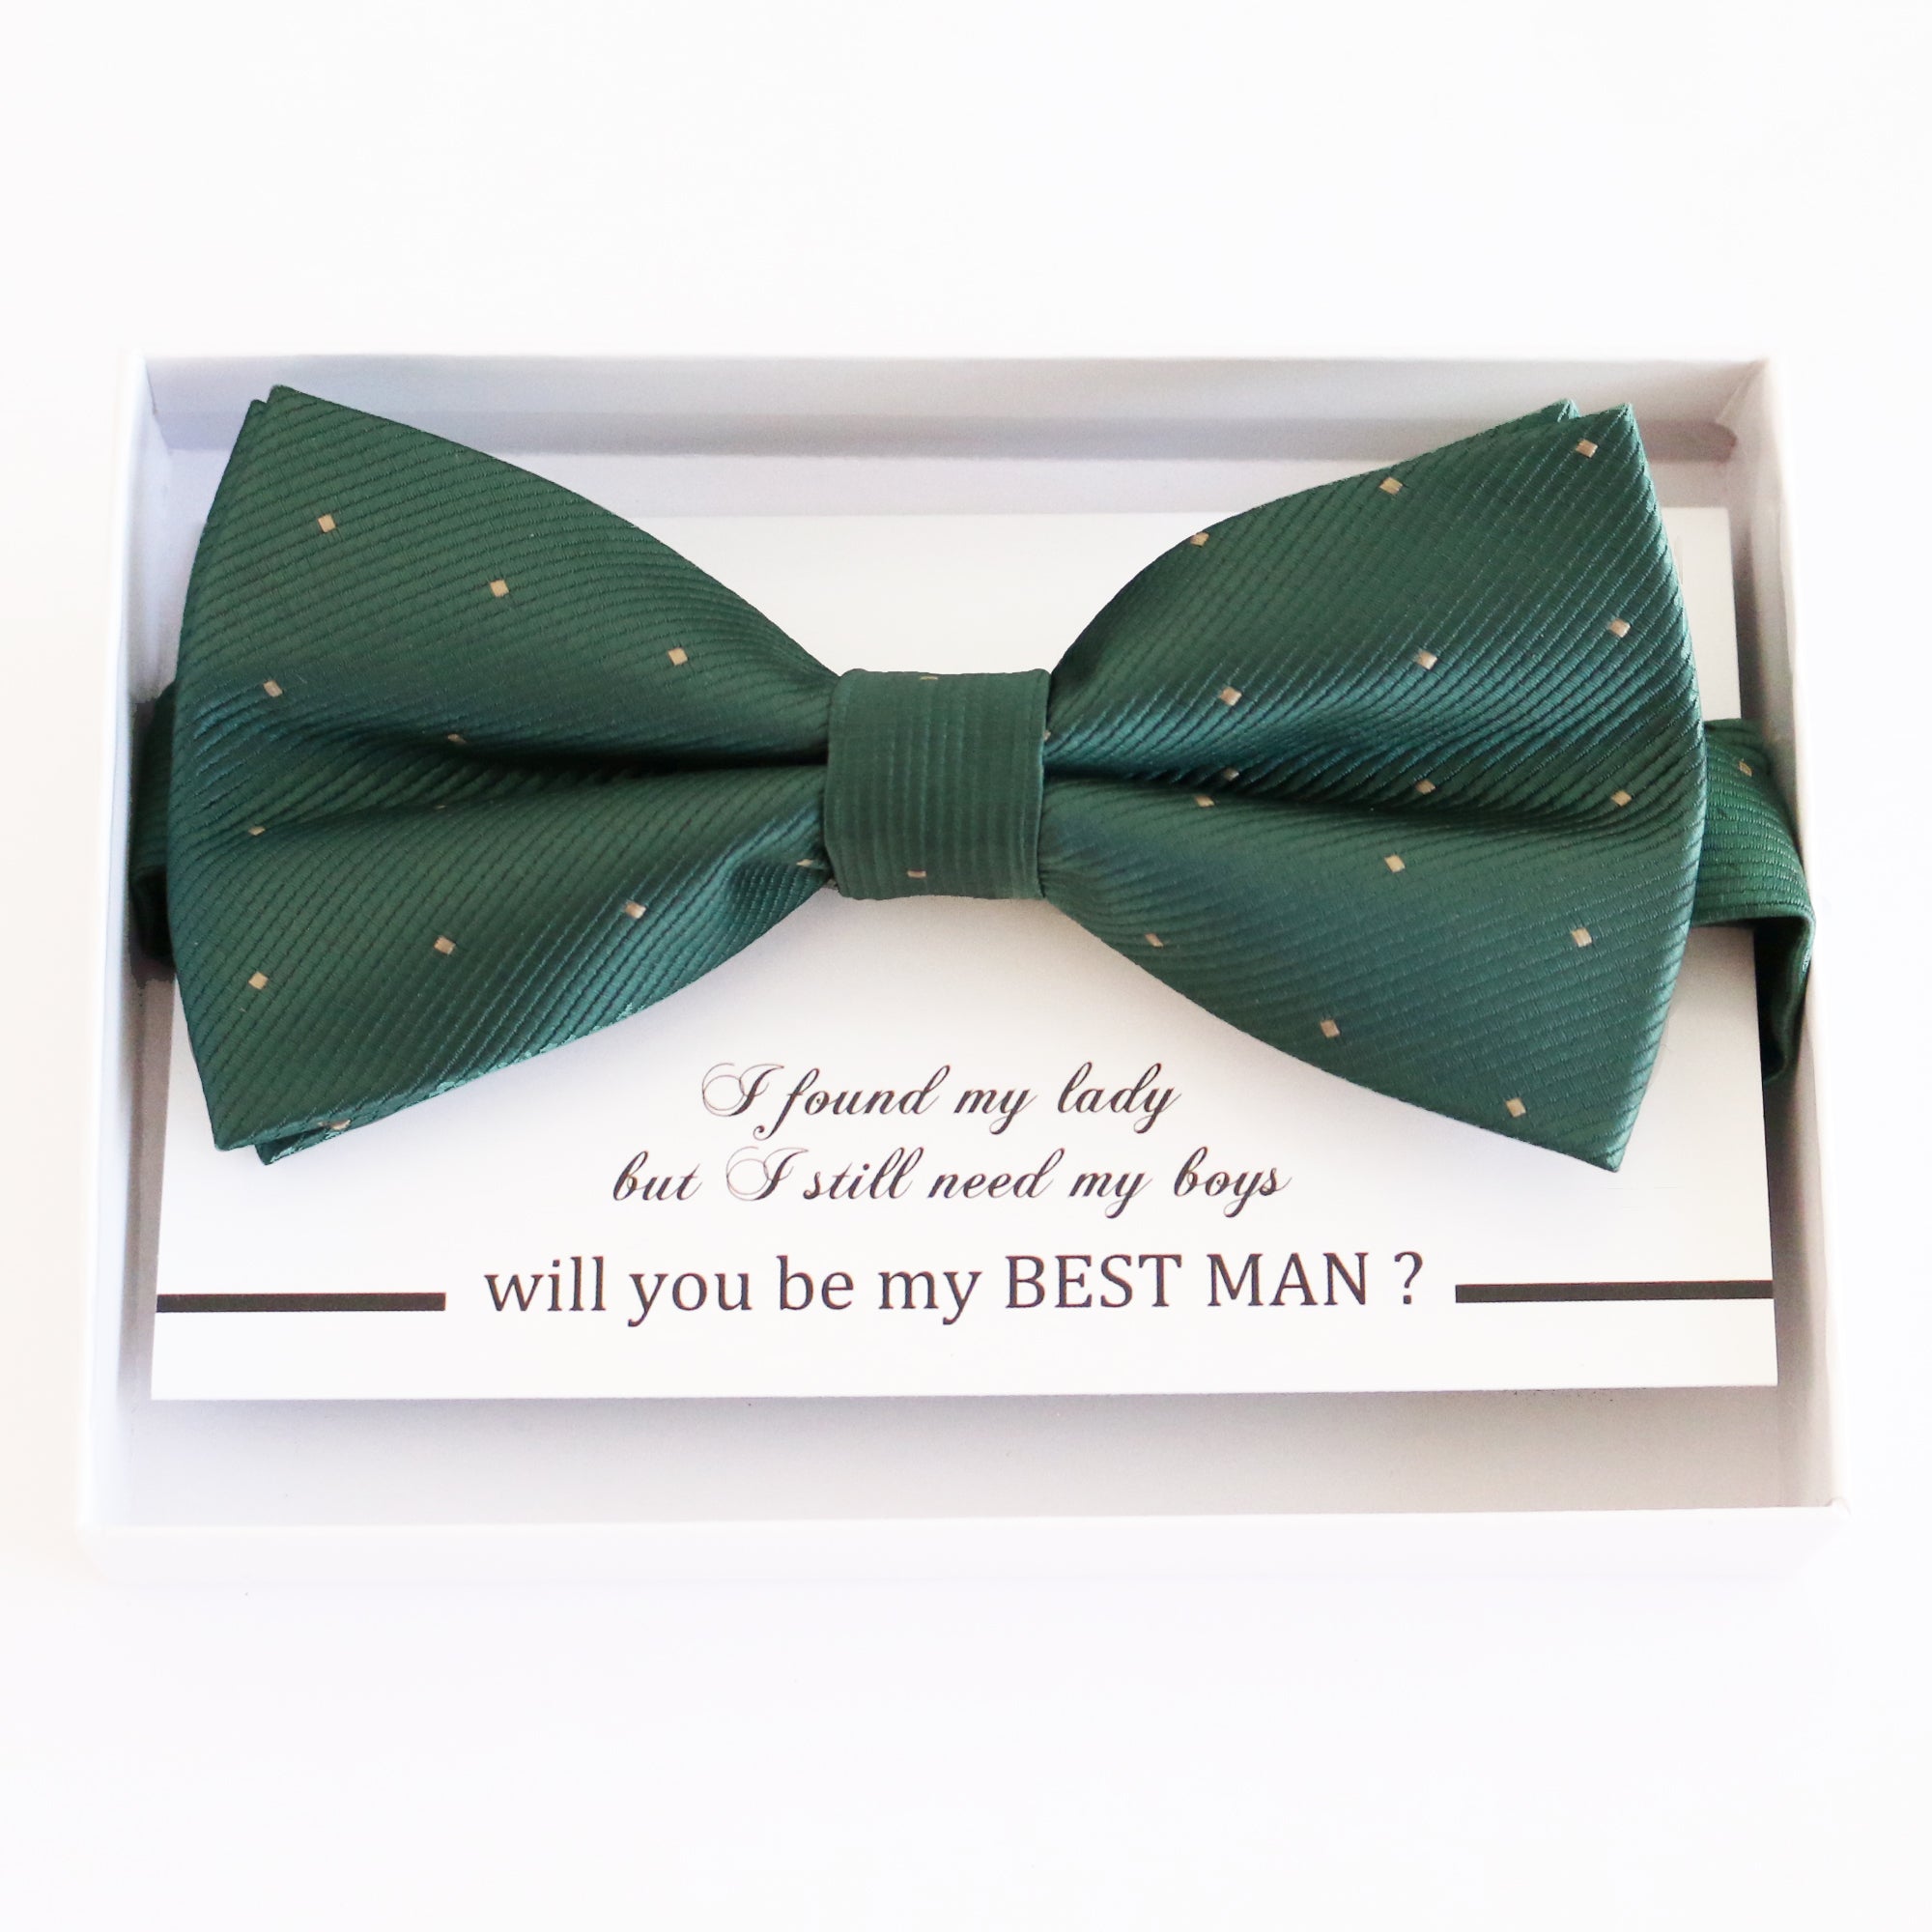 Green bow tie Best man Groomsman Man of honor ring bearer request Christmas New year gift, Kids adult bow, Adjustable Pre tied High quality